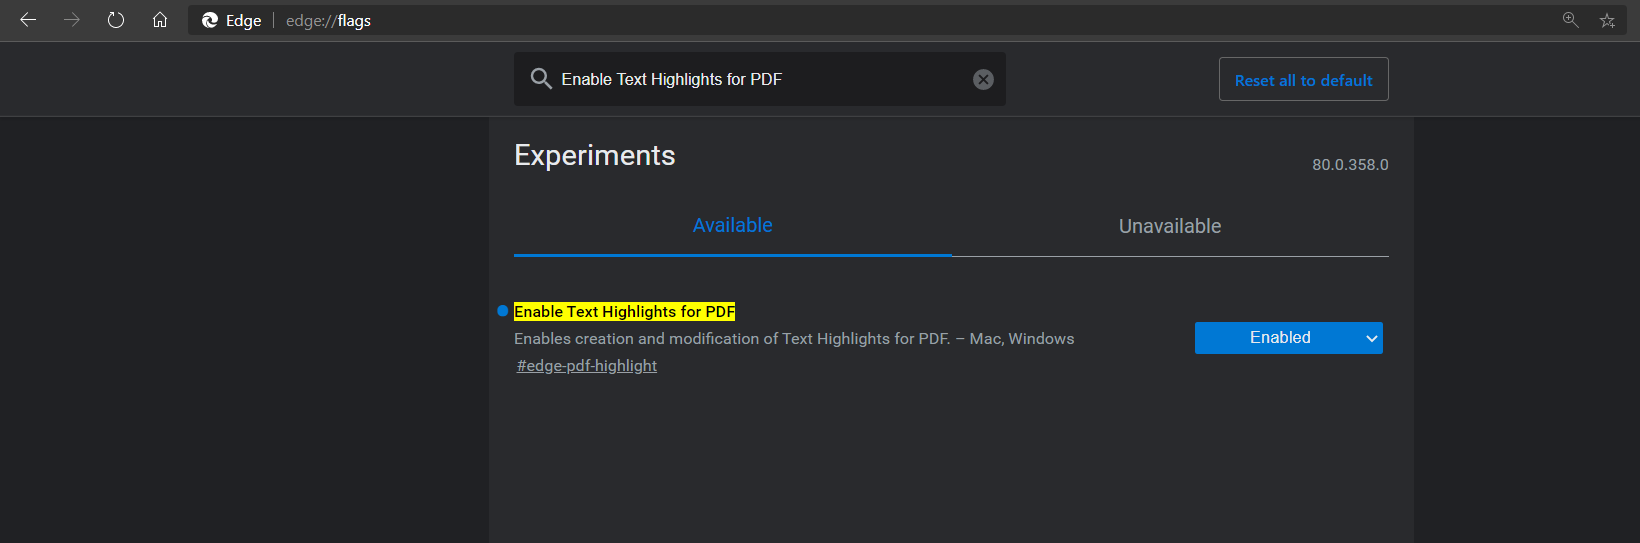 The option to remove highlights from PDFs is gone in version 80.0.358 -  Microsoft Tech Community